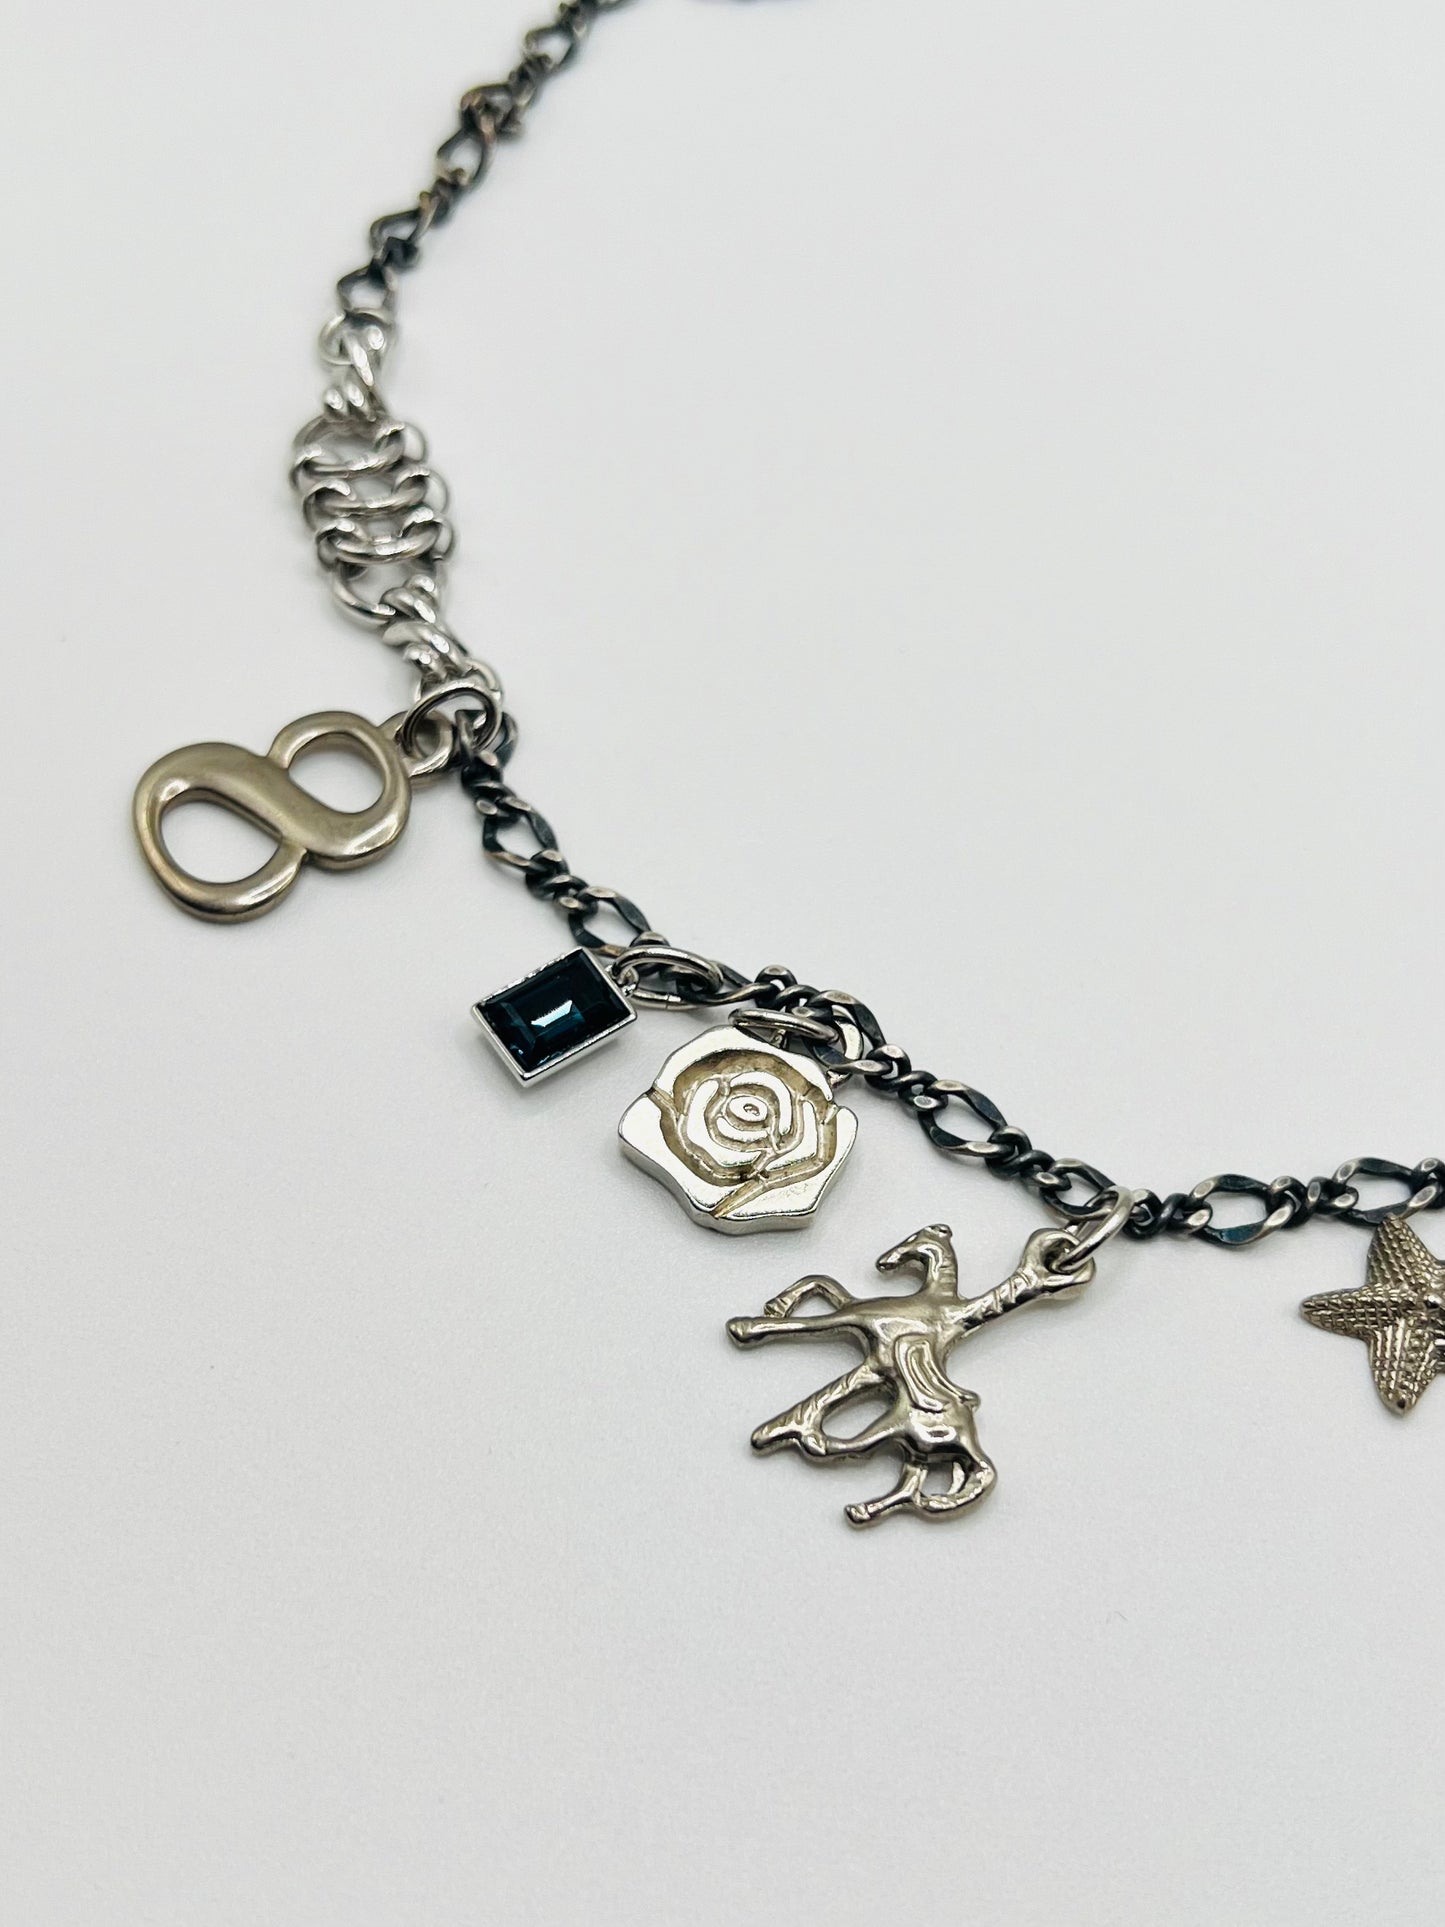 Chain charm necklace - B